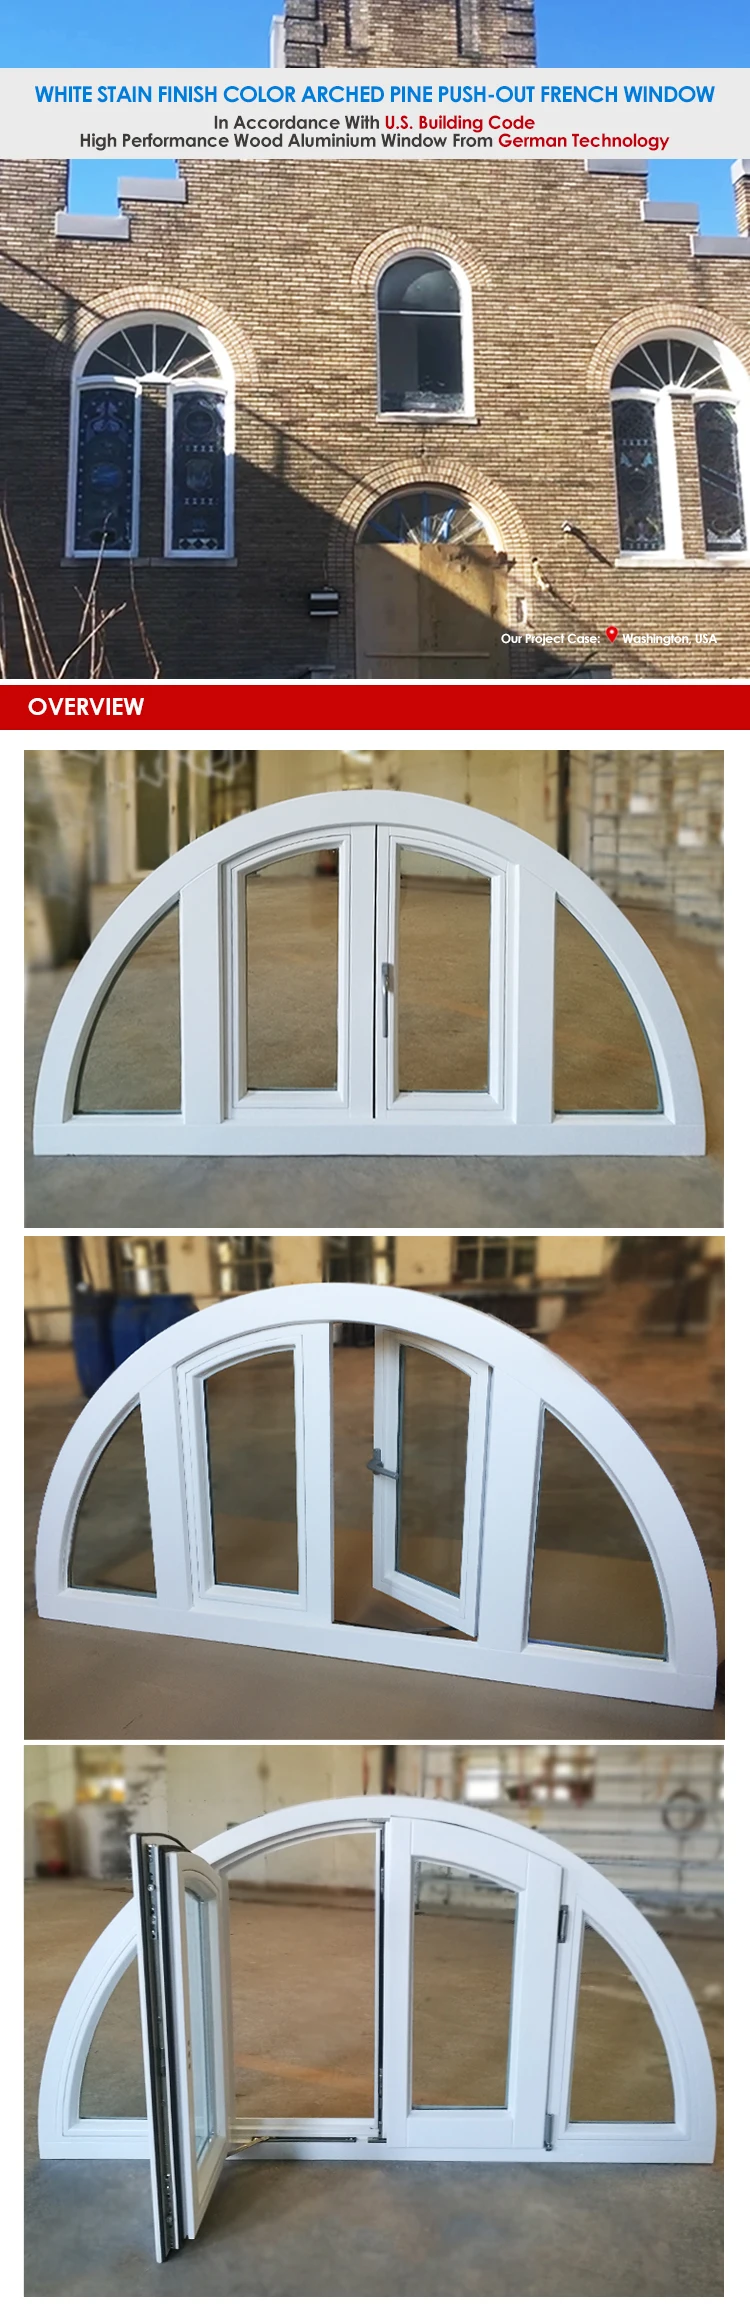 Top grade American Arch Round style Grills Design Solid wood bright white color casement windows